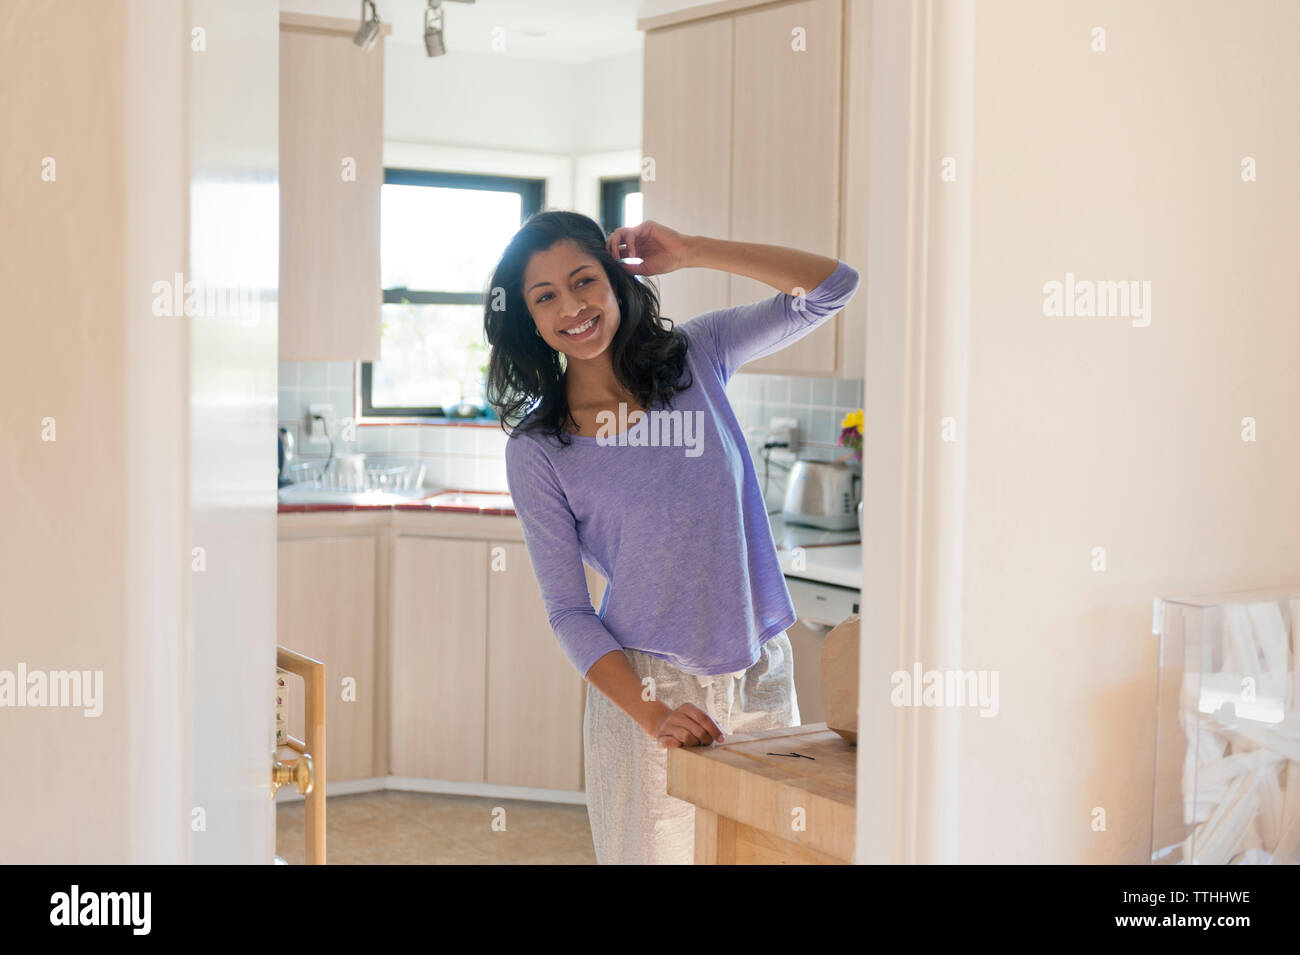 Cheerful woman standing in domestic kitchen Stock Photo